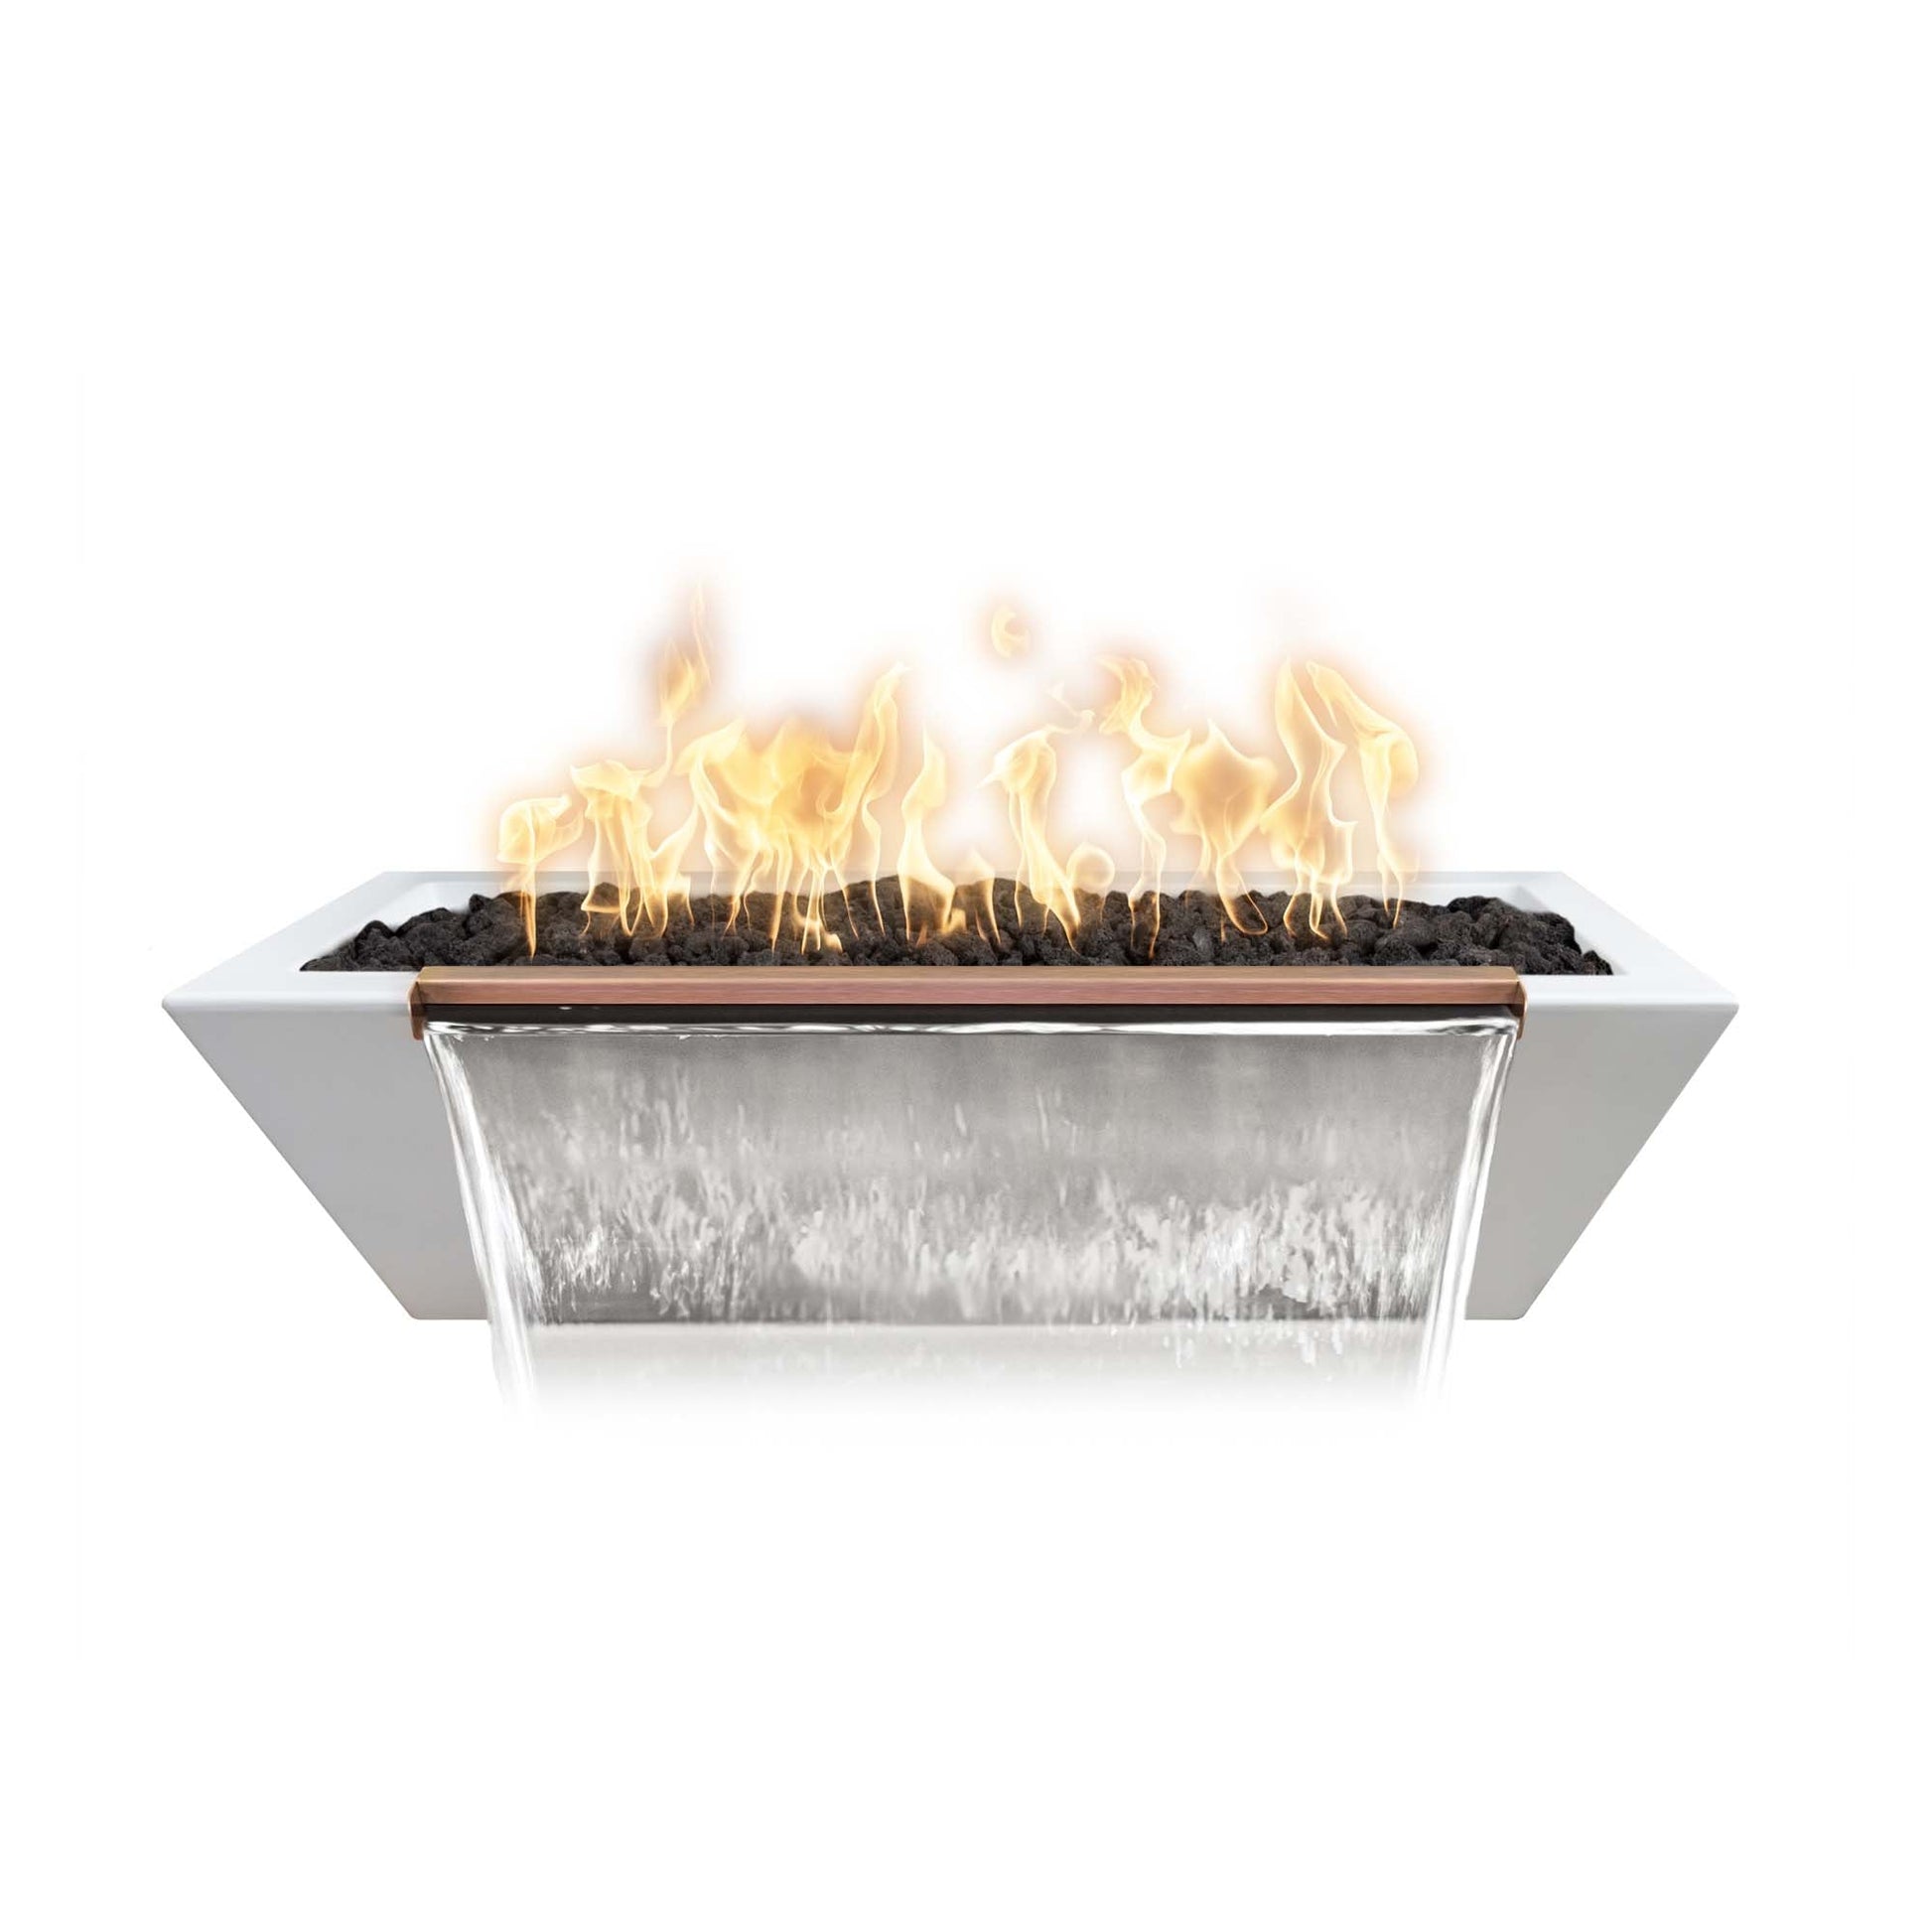 The Outdoor Plus Linear Maya 48" Vanilla GFRC Concrete Natural Gas Fire & Water Bowl with Match Lit with Flame Sense Ignition